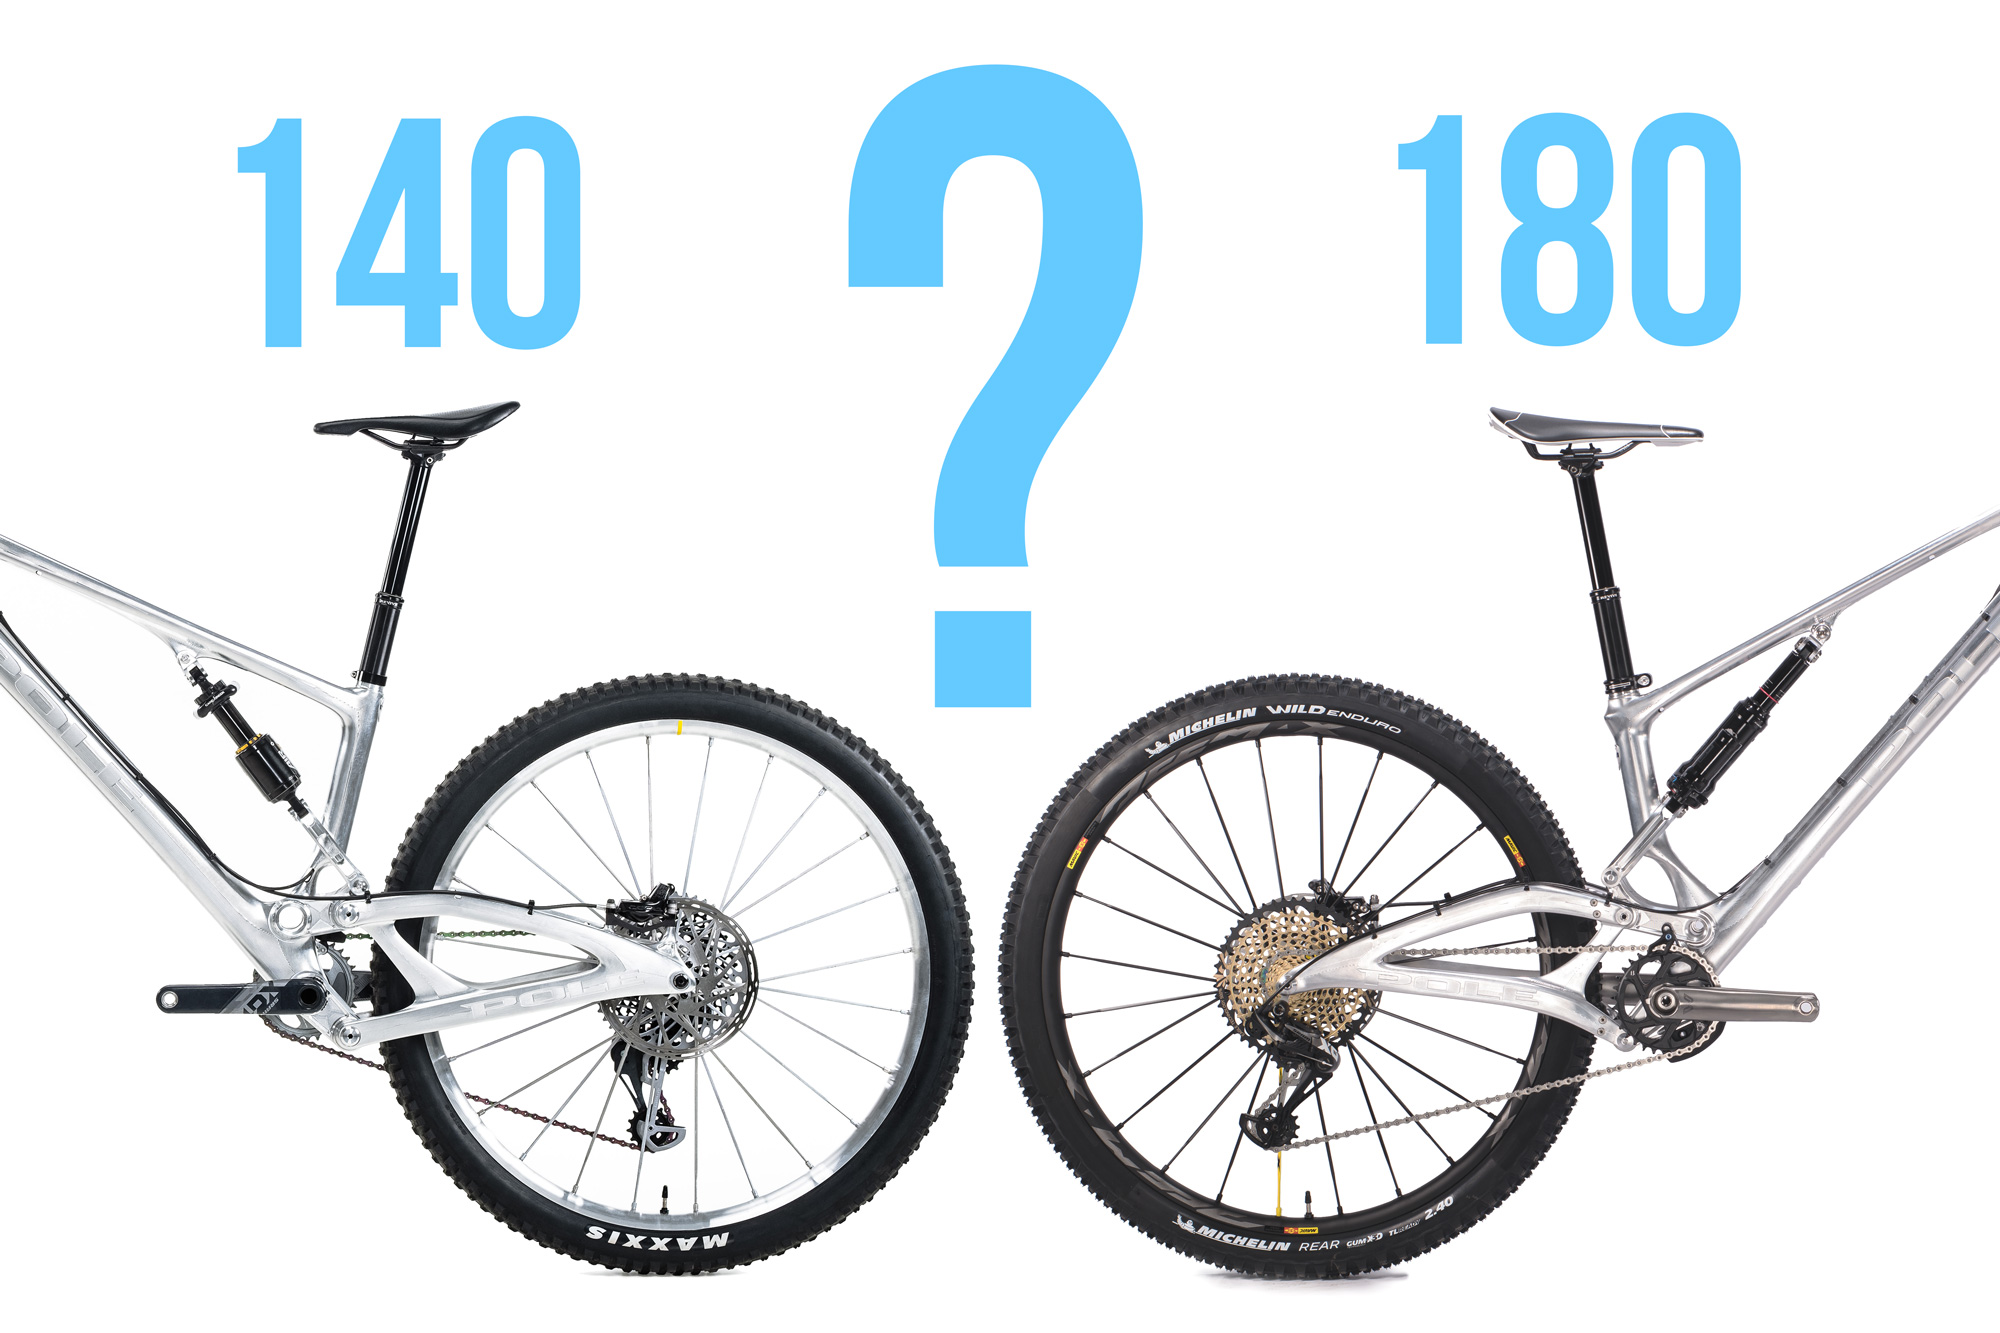 What is the difference between Stamina 140 and 180 - Pole Bicycles